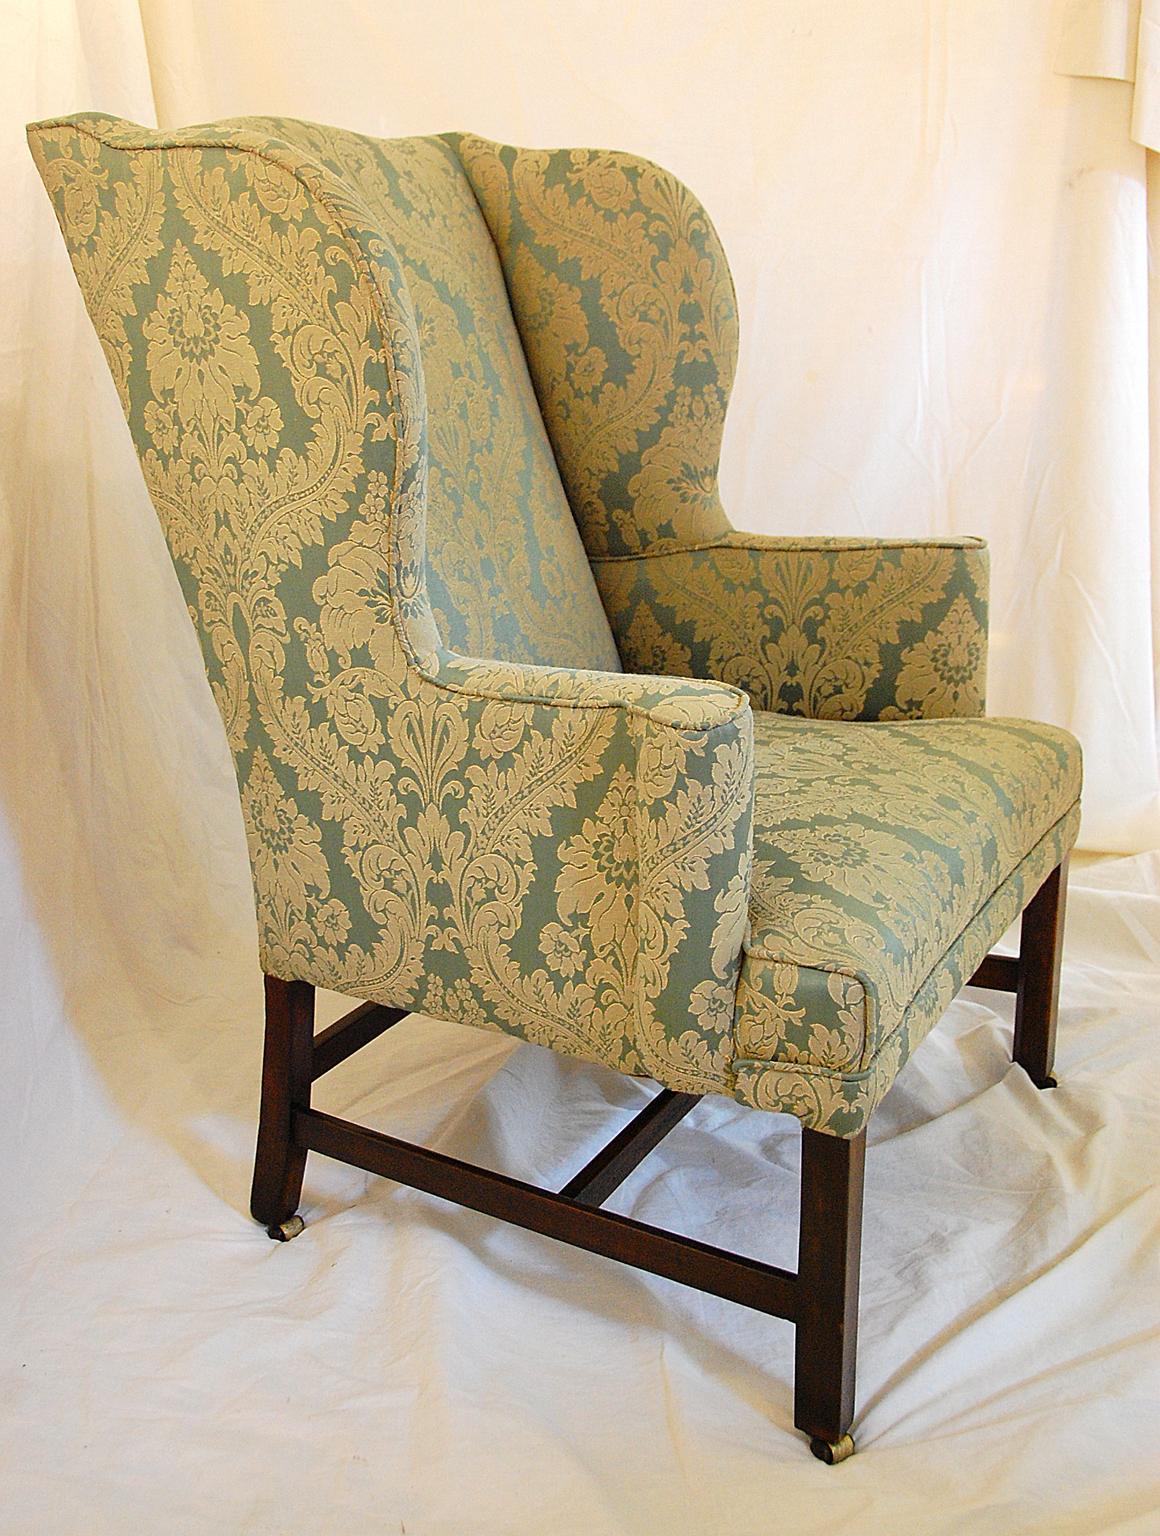 This generous proportioned English Georgian Chippendale mahogany period wing chair with serpentine back rail and graceful side wings leading to scroll out upholstered arms was crafted in the late 18th century. The mahogany square legs are chamfered